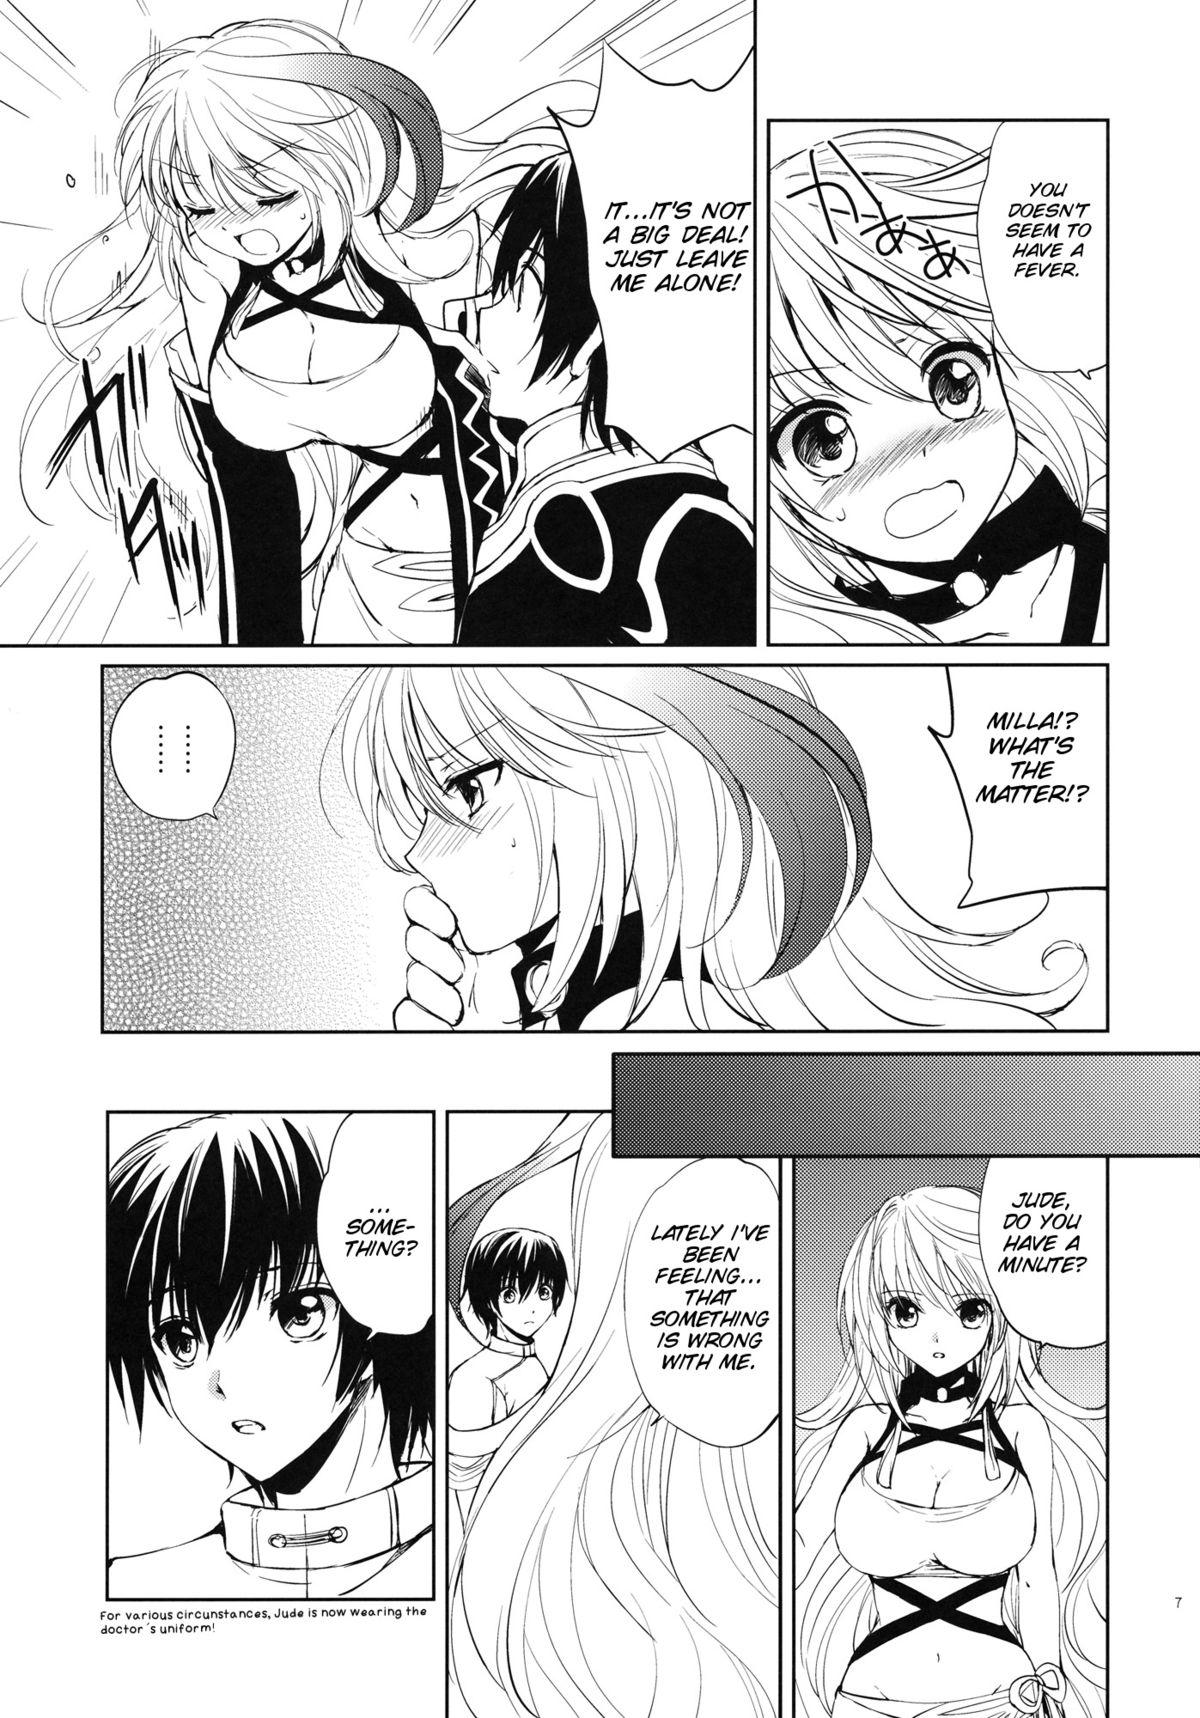 Jeans Milla x Koi - Tales of xillia Hot Pussy - Page 6